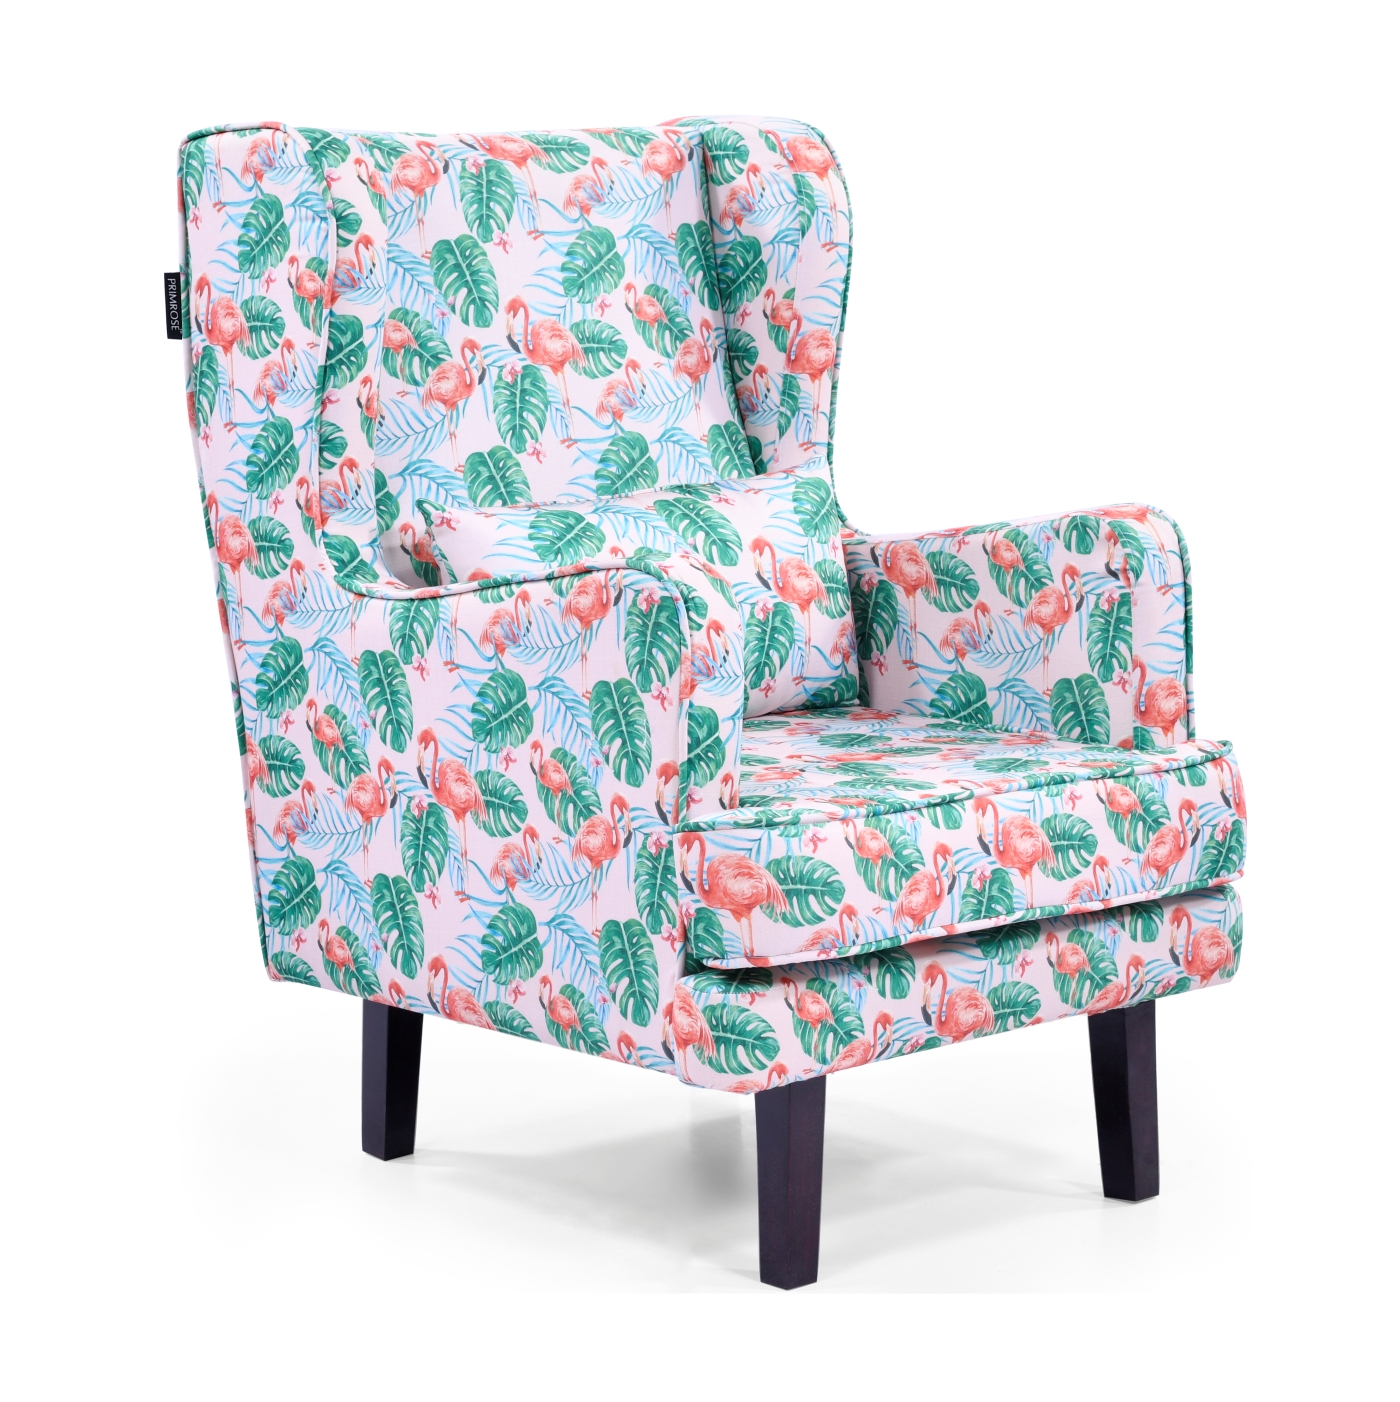 PRIMROSE Tropical Flamingo Digital Printed Faux Linen Fabric High Back Wing Chair - Red, Green  